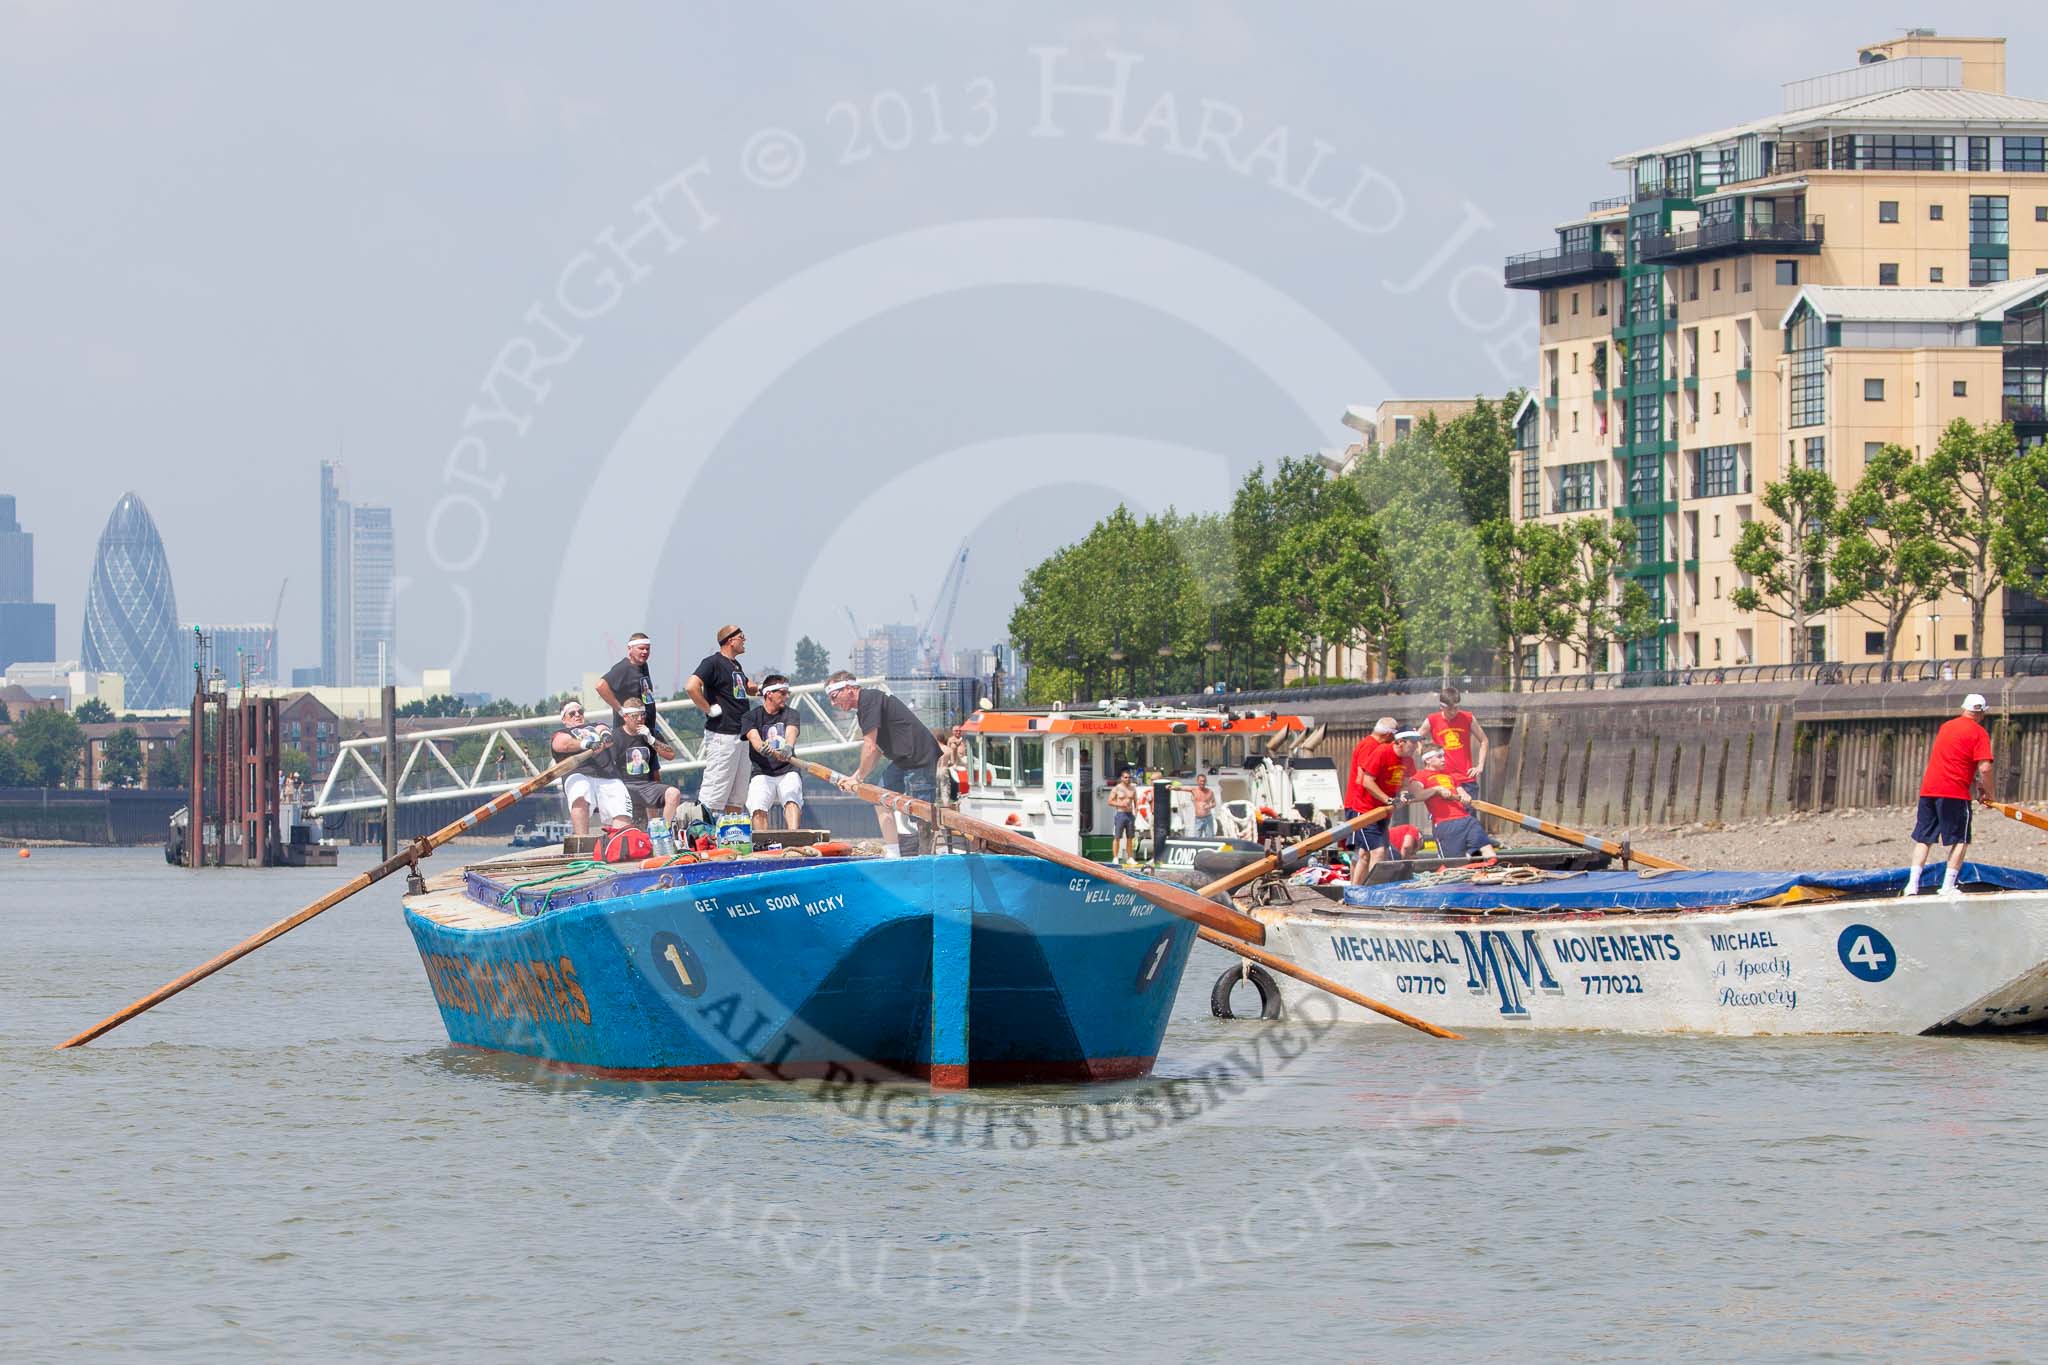 TOW River Thames Barge Driving Race 2013: Rear view of barge "Darren Lacey", by Princess Pocahontas, during the race, approaching Masthouse Terrace Pier. In the background the skyscrapers of the City of London, including the "Gherkin". On the right of "Darren Lacey" is barge "Spirit of Mountabatten", by Mechanical Movements and Enabling Services Ltd..
River Thames between Greenwich and Westminster,
London,

United Kingdom,
on 13 July 2013 at 12:42, image #180